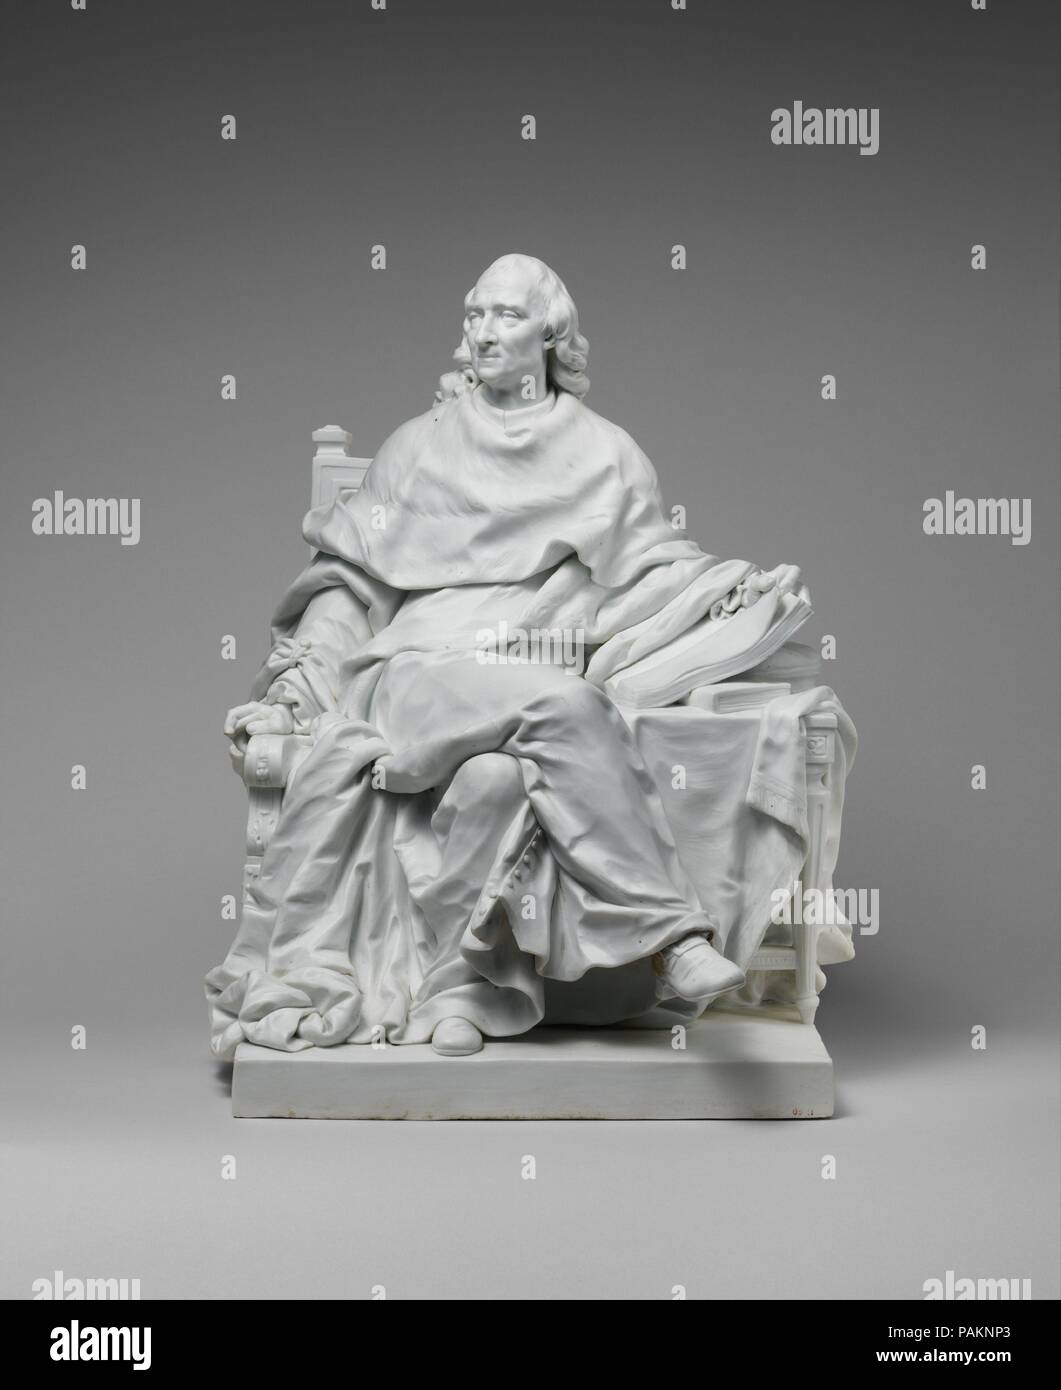 Charles de Secondat, Baron de Montesquieu (1689-1755). Culture: French, Sèvres. Dimensions: Overall (confirmed): 14 x 11 1/4 x 10 5/16 in. (35.6 x 28.6 x 26.2 cm); Base: 9 9/16 x 8 3/4 in. (24.3 x 22.2 cm). Manufactory: Sèvres Manufactory (French, 1740-present). Modeler: After a model by Clodion (Claude Michel) (French, Nancy 1738-1814 Paris). Date: ca. 1784.  This portrait of the writer-philosopher Montesquieu is a reduction of a full-size marble executed as one of a series of statues of the Great Men of France commissioned on behalf of Louis XVI from Clodion, Houdon, Pajou, and other sculpto Stock Photo